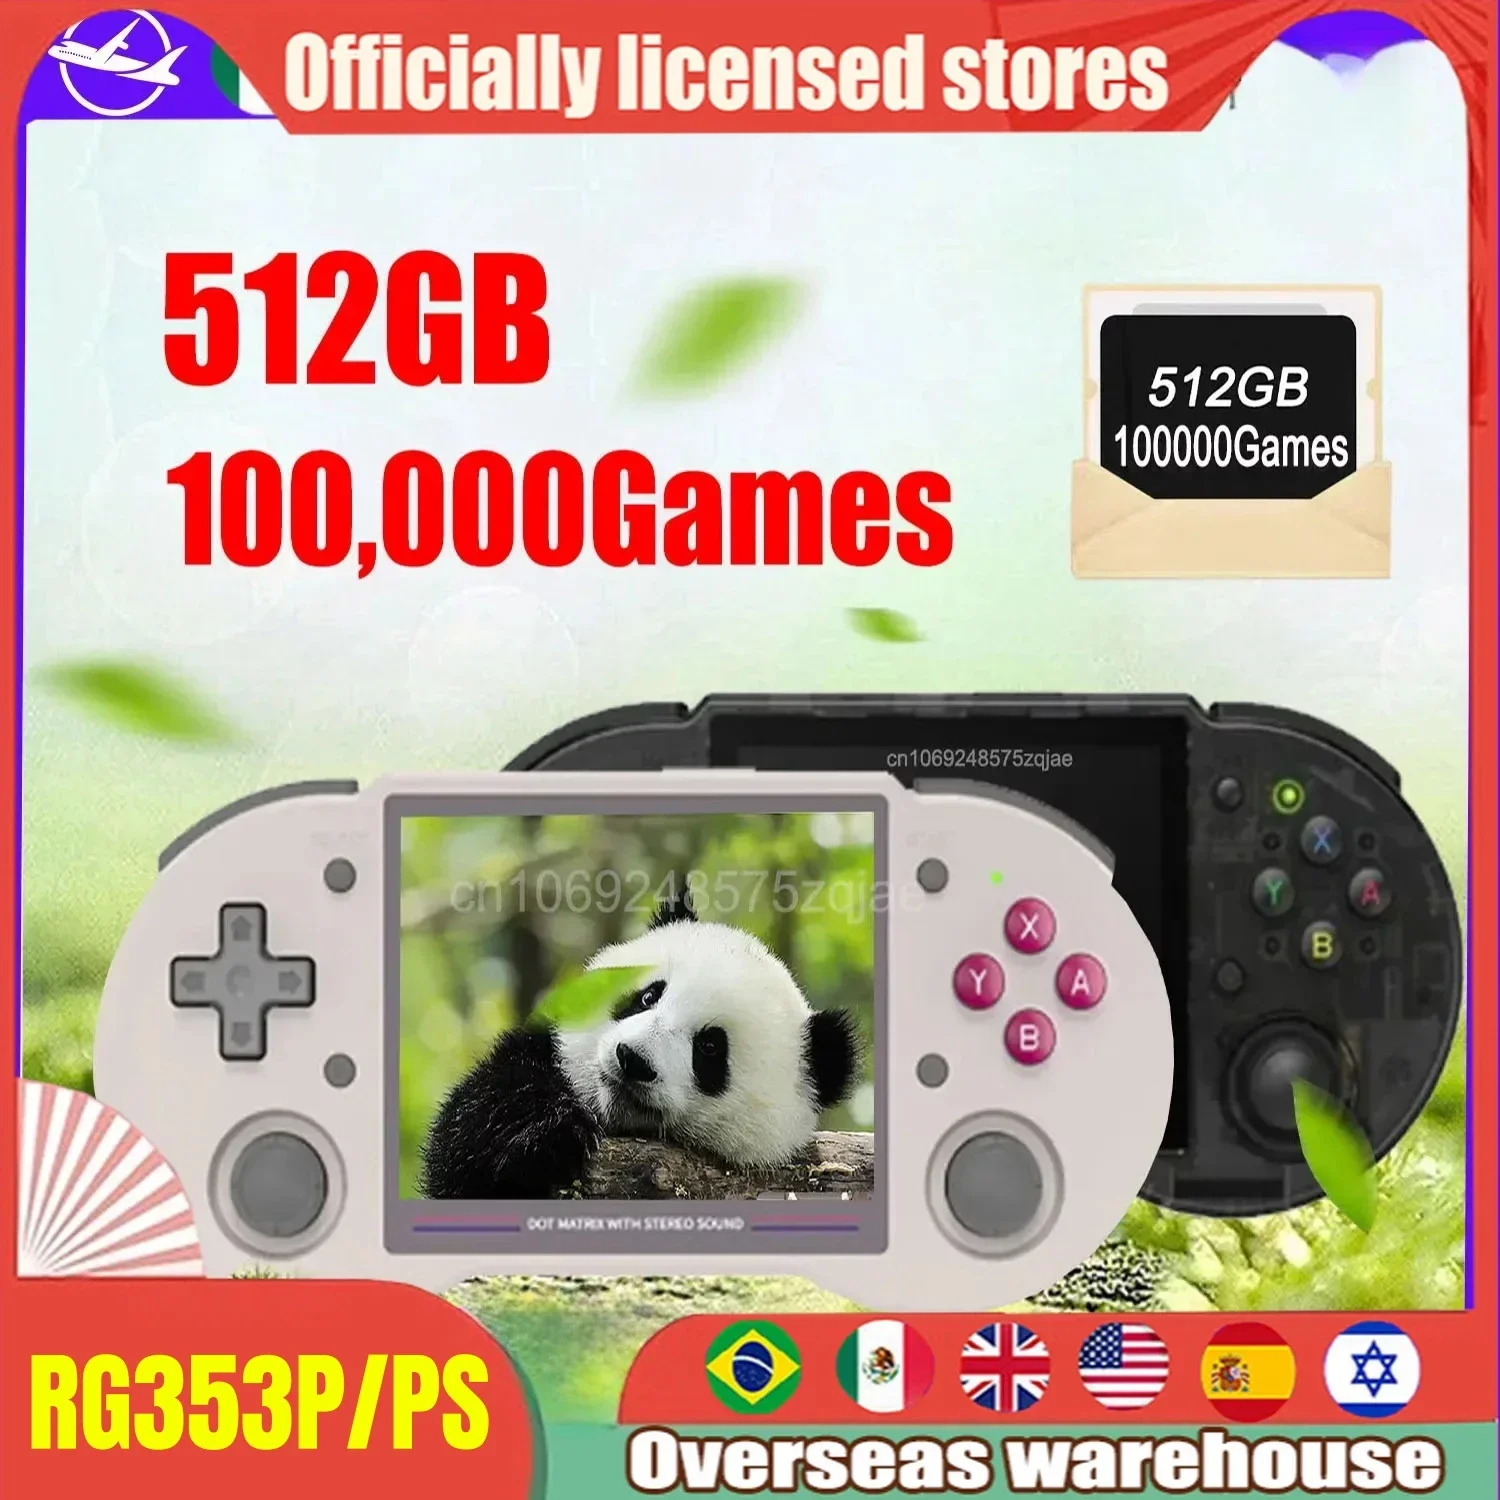 

ANBERNIC RG353PS RG353P Handheld Game Console RK3566 3.5 INCH IPS SCREEN Android Linux OS HD Video Games PS1 NDS PSP 450 GAMES